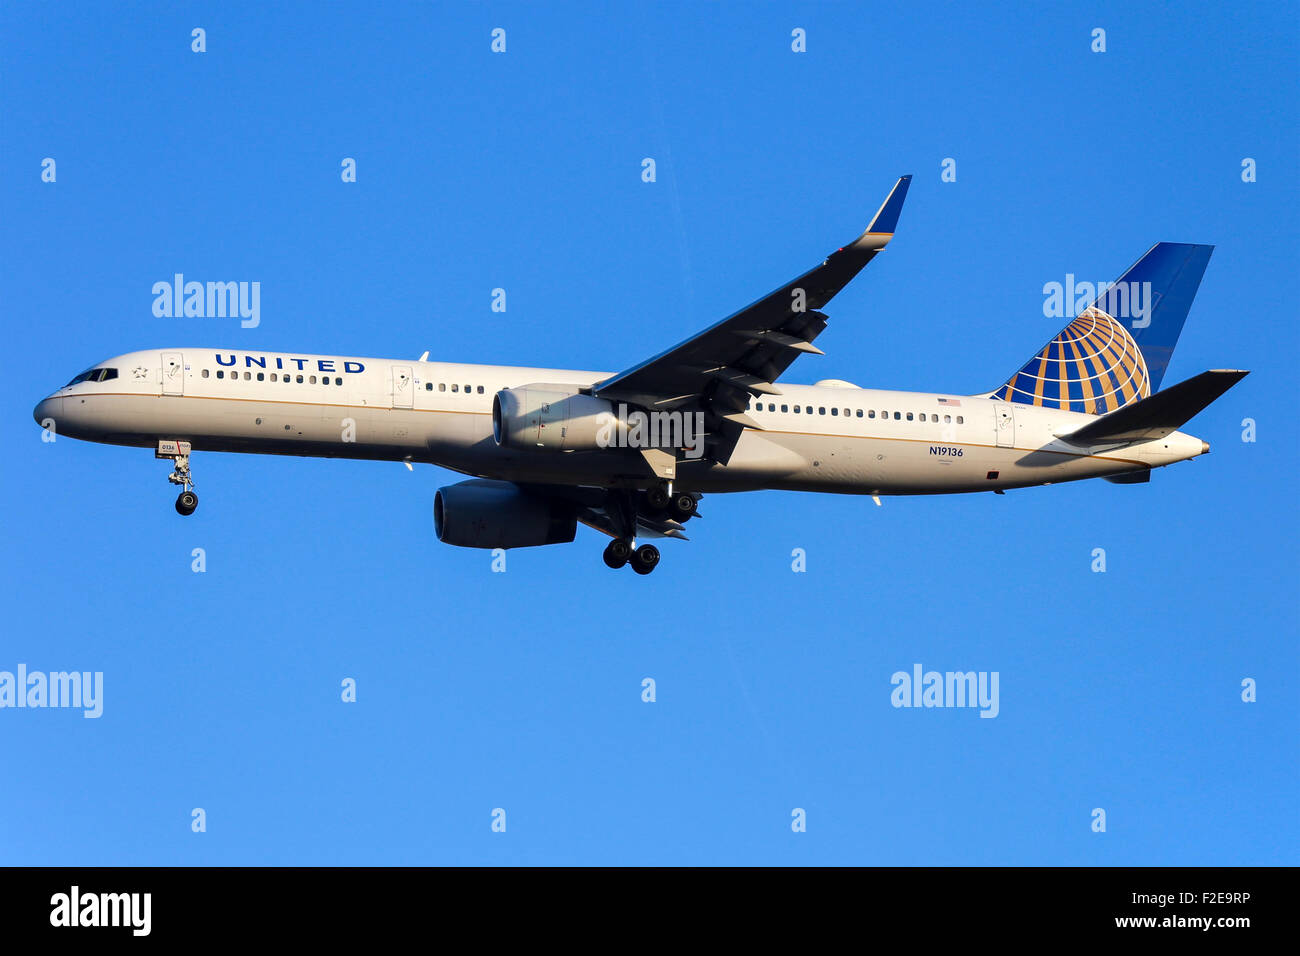 United Airlines Boeing 757-200 approaches runway 23R at Manchester airport. Stock Photo